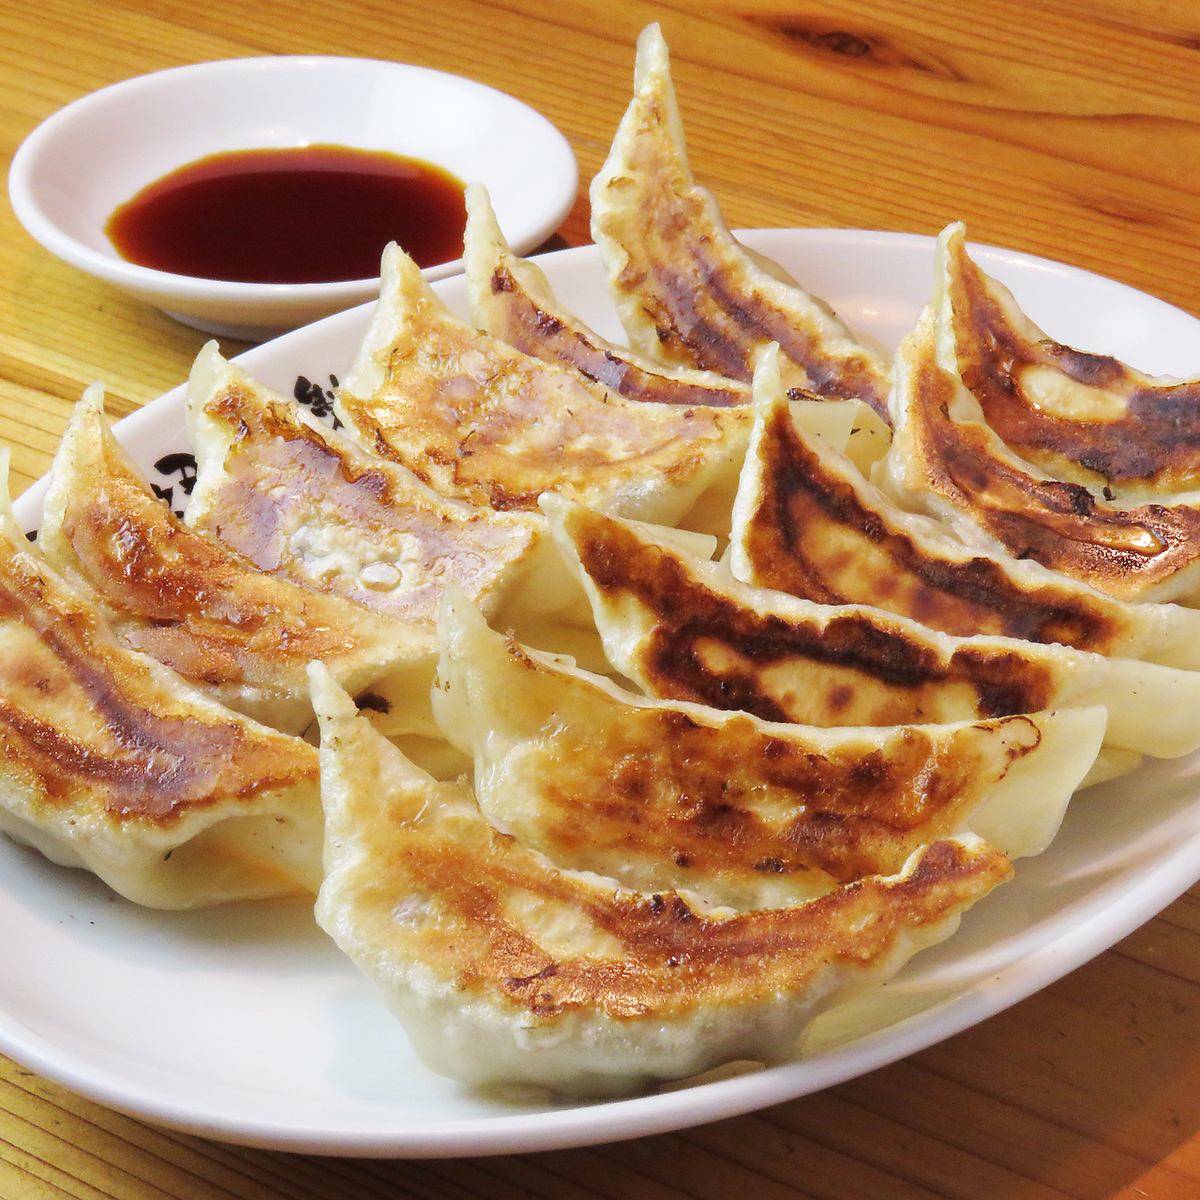 Build up your stamina with our homemade gyoza!